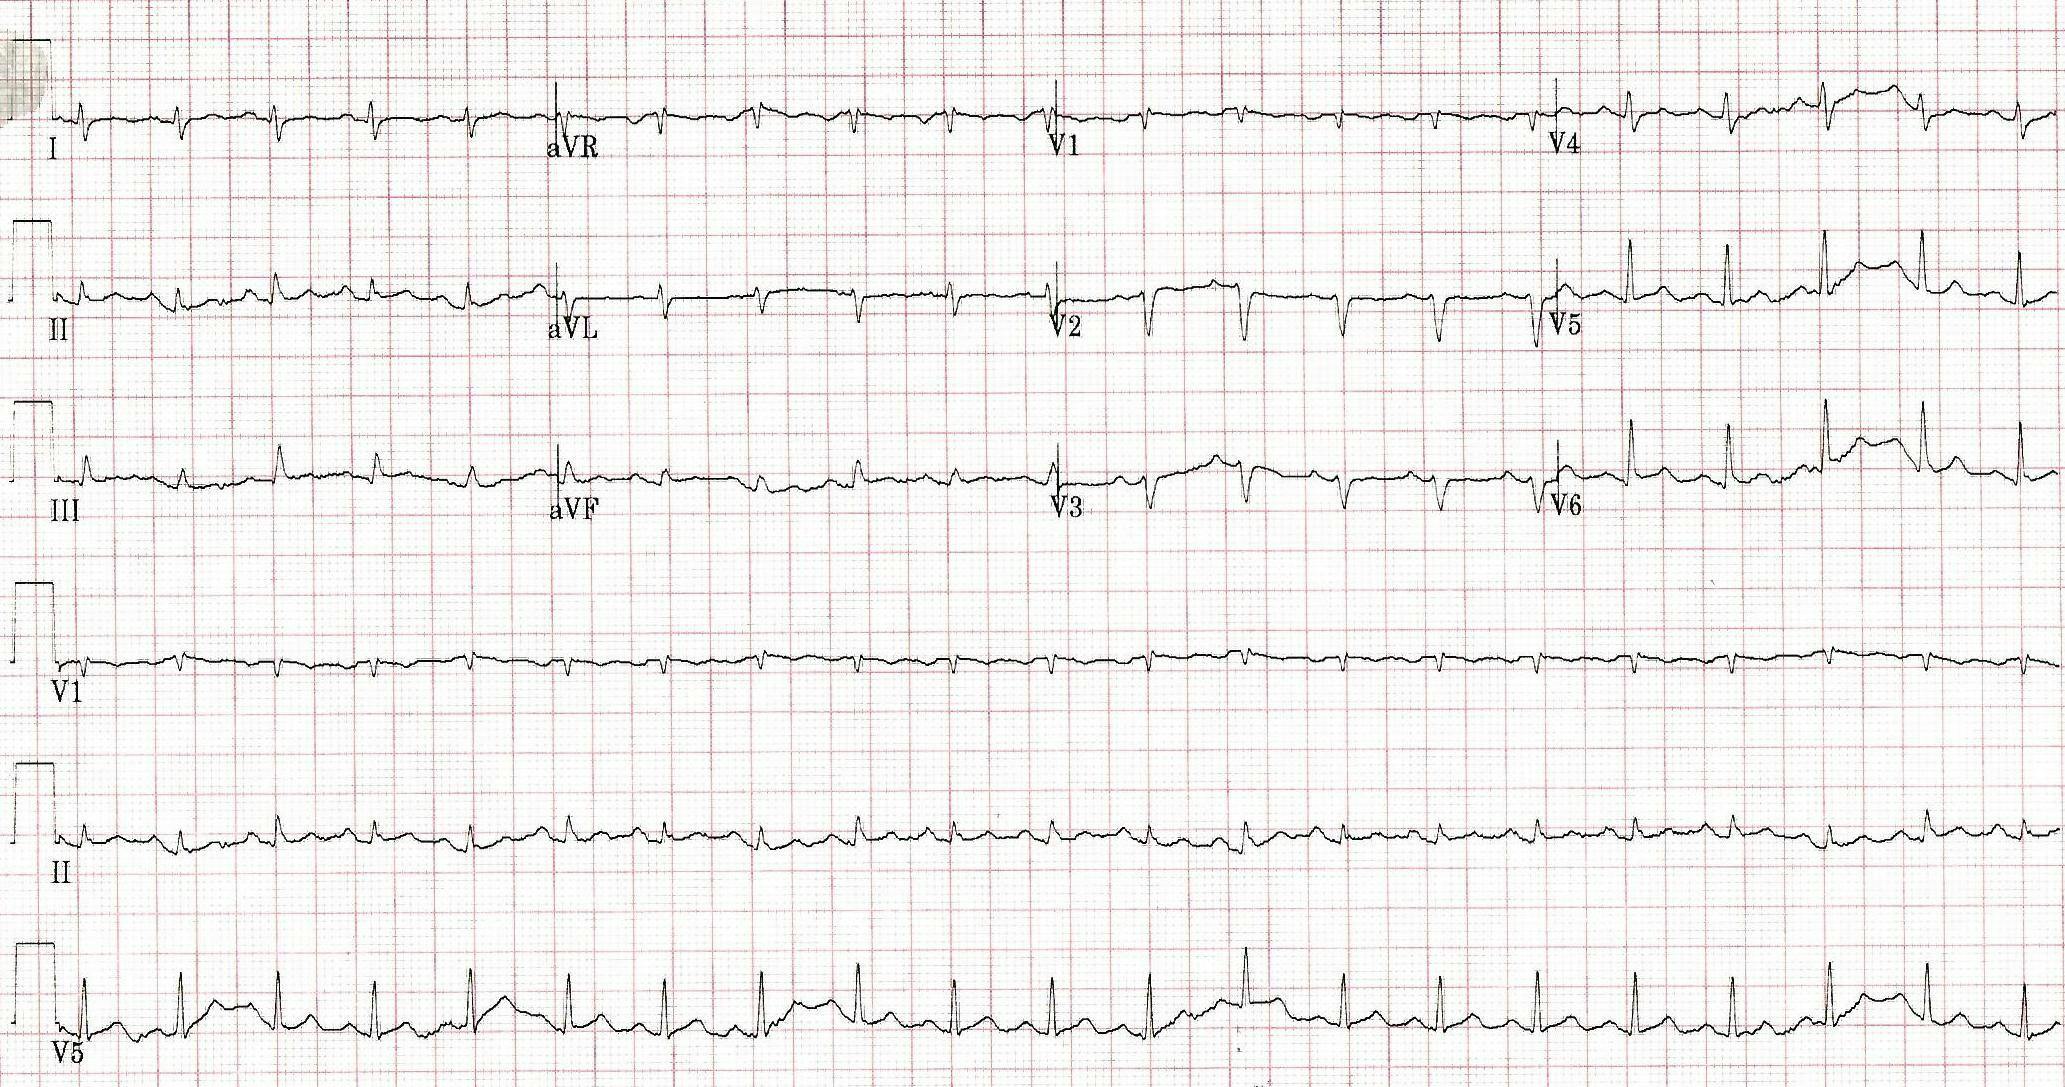 EKG of a patient with tachycardia